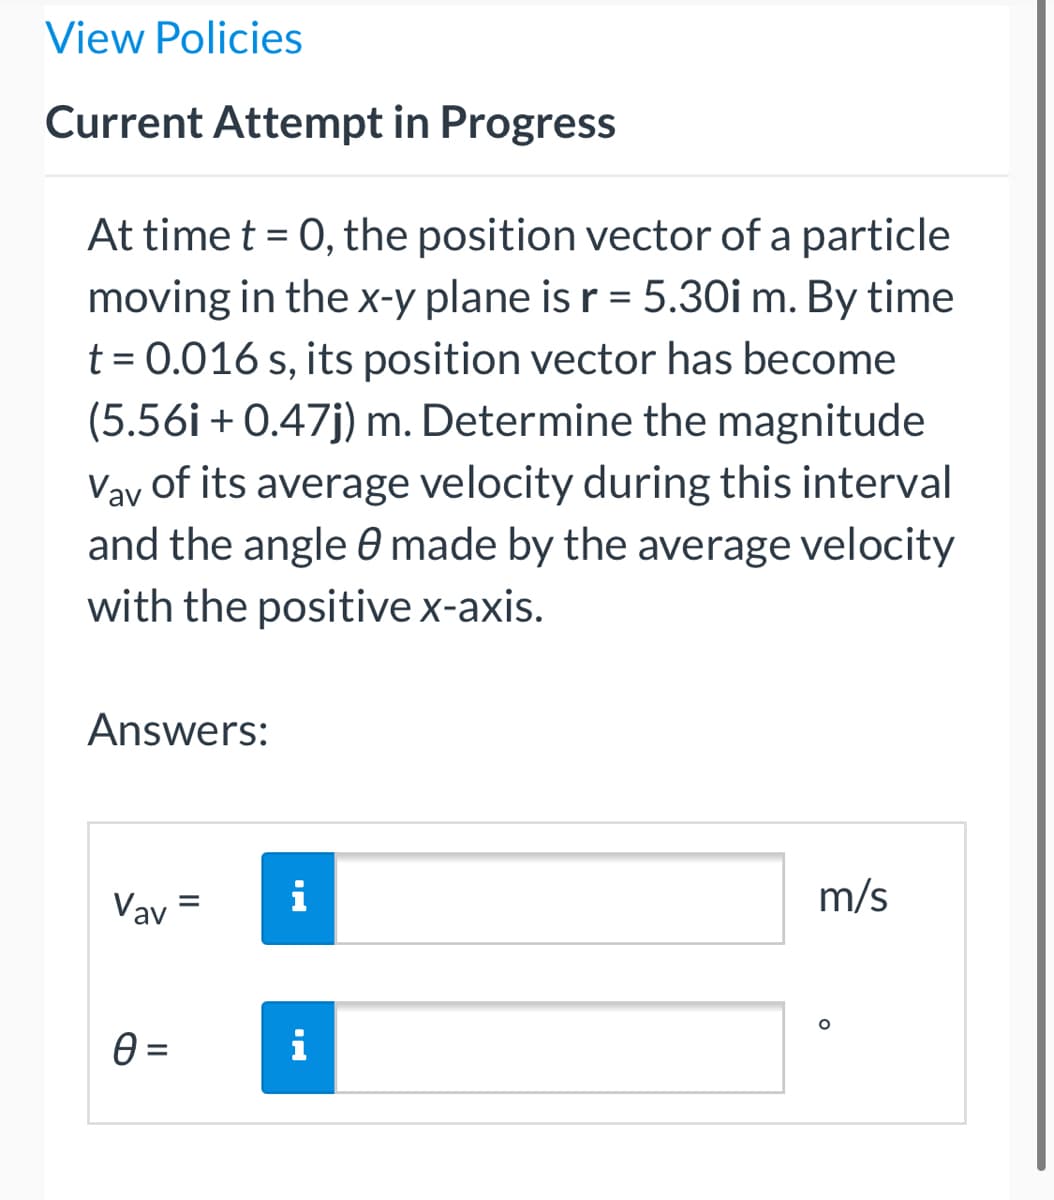 View Policies
Current Attempt in Progress
At time t = 0, the position vector of a particle
moving in the x-y plane is r = 5.30i m. By time
t = 0.016 s, its position vector has become
(5.56i + 0.47j) m. Determine the magnitude
Vay of its average velocity during this interval
and the angle made by the average velocity
with the positive x-axis.
Answers:
Vav=
m/s
O
i
i